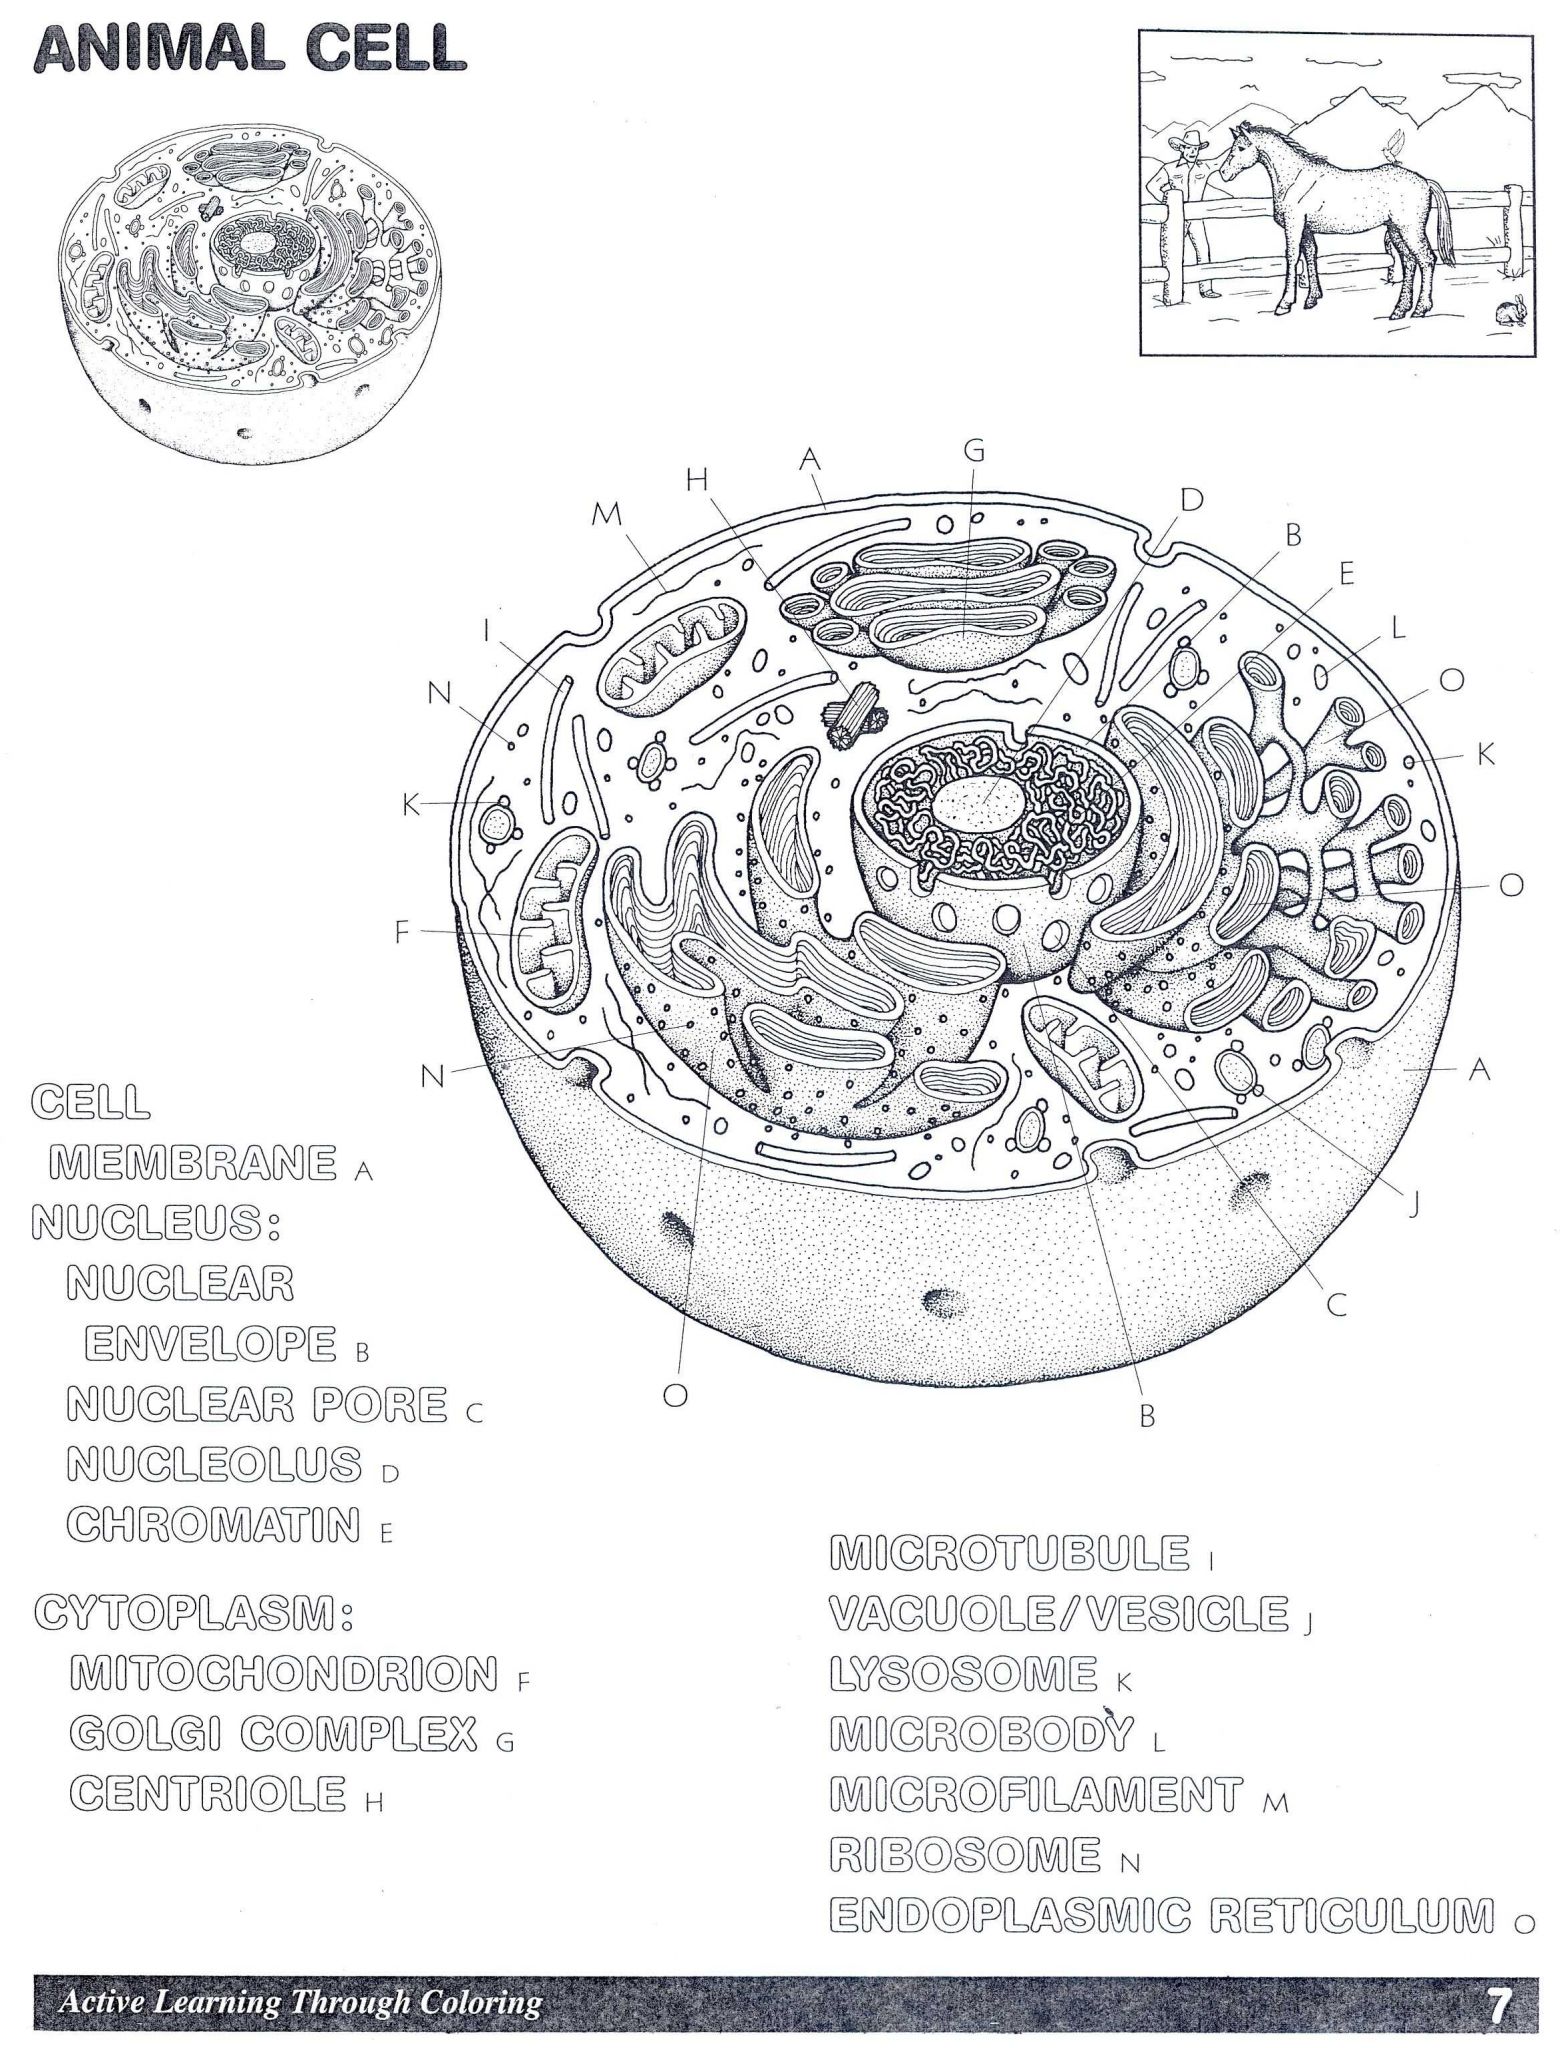 The Cell Cycle Coloring Worksheet Answers as Well as Animal Cell Worksheet Colouring Pages Homeschooling